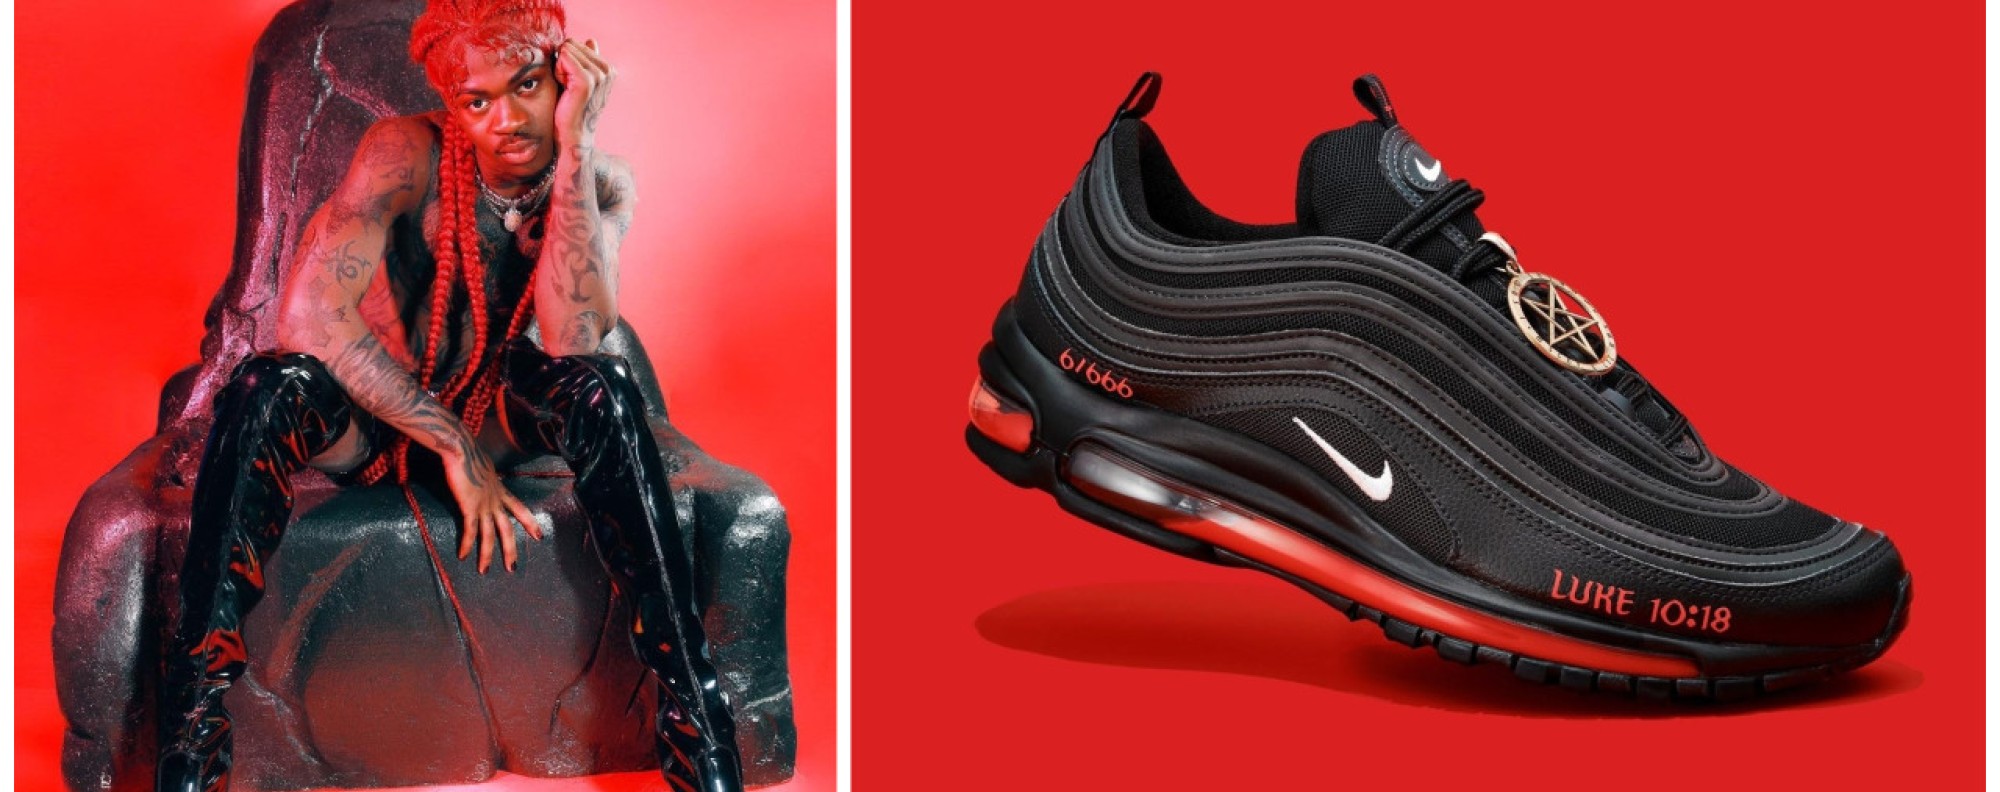 Inside Lil Nas X's Satan Shoe, the sneaker that sold out in under a minute: the limited-edition, US$1,000 MSCHF shoe really a Air Max 97 knock-off? | South China Morning